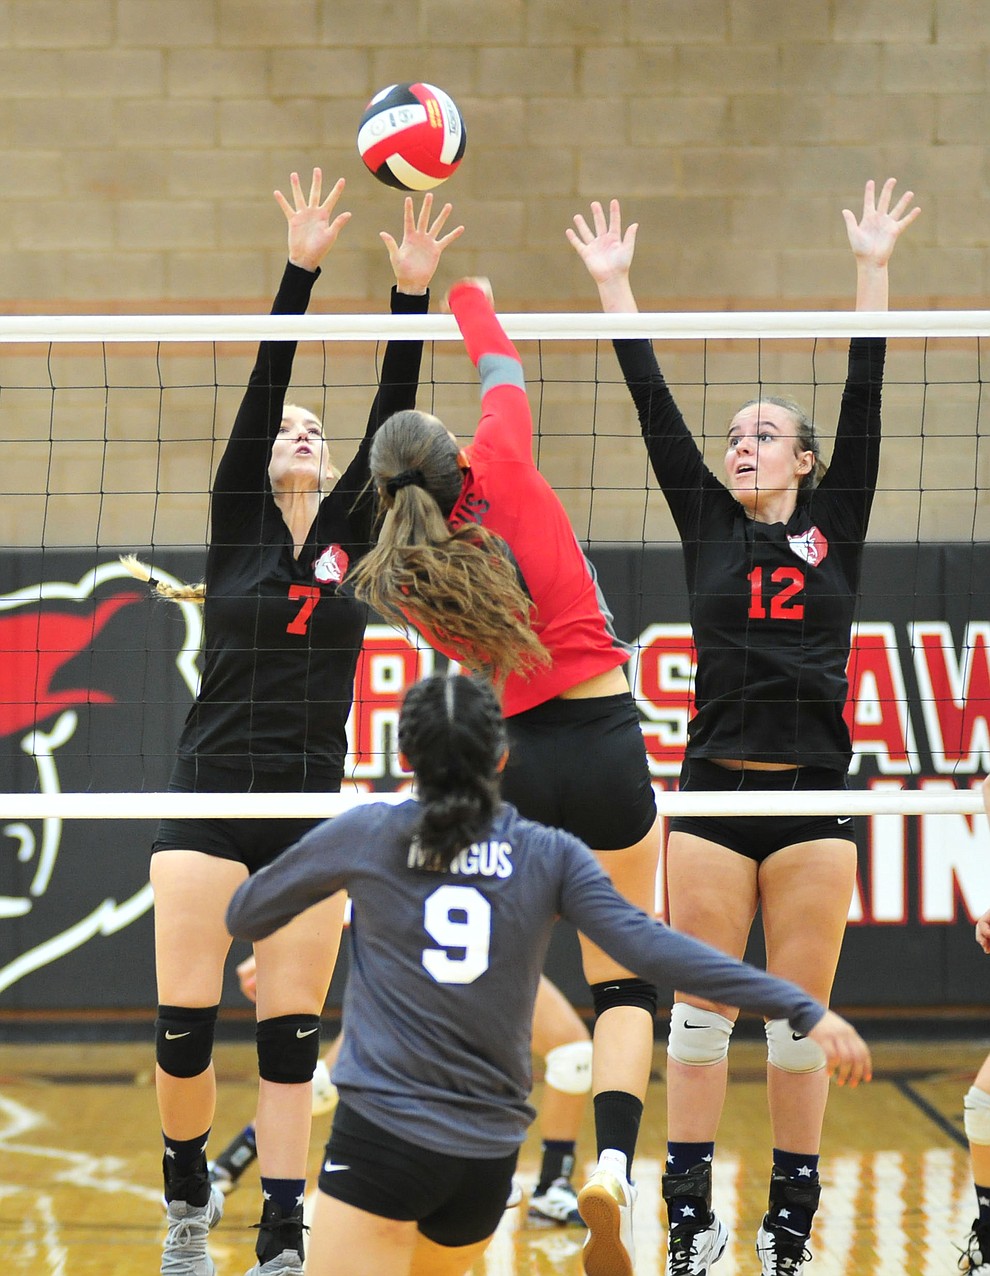 Bradshaw Mountain's Rylee Bundrick and Jordyn Moser go for a block as the Bears faced the Mingus Marauders in a volleyball matchup Tuesday, Sept. 11, 2018 in Prescott Valley. (Les Stukenberg/Courier)